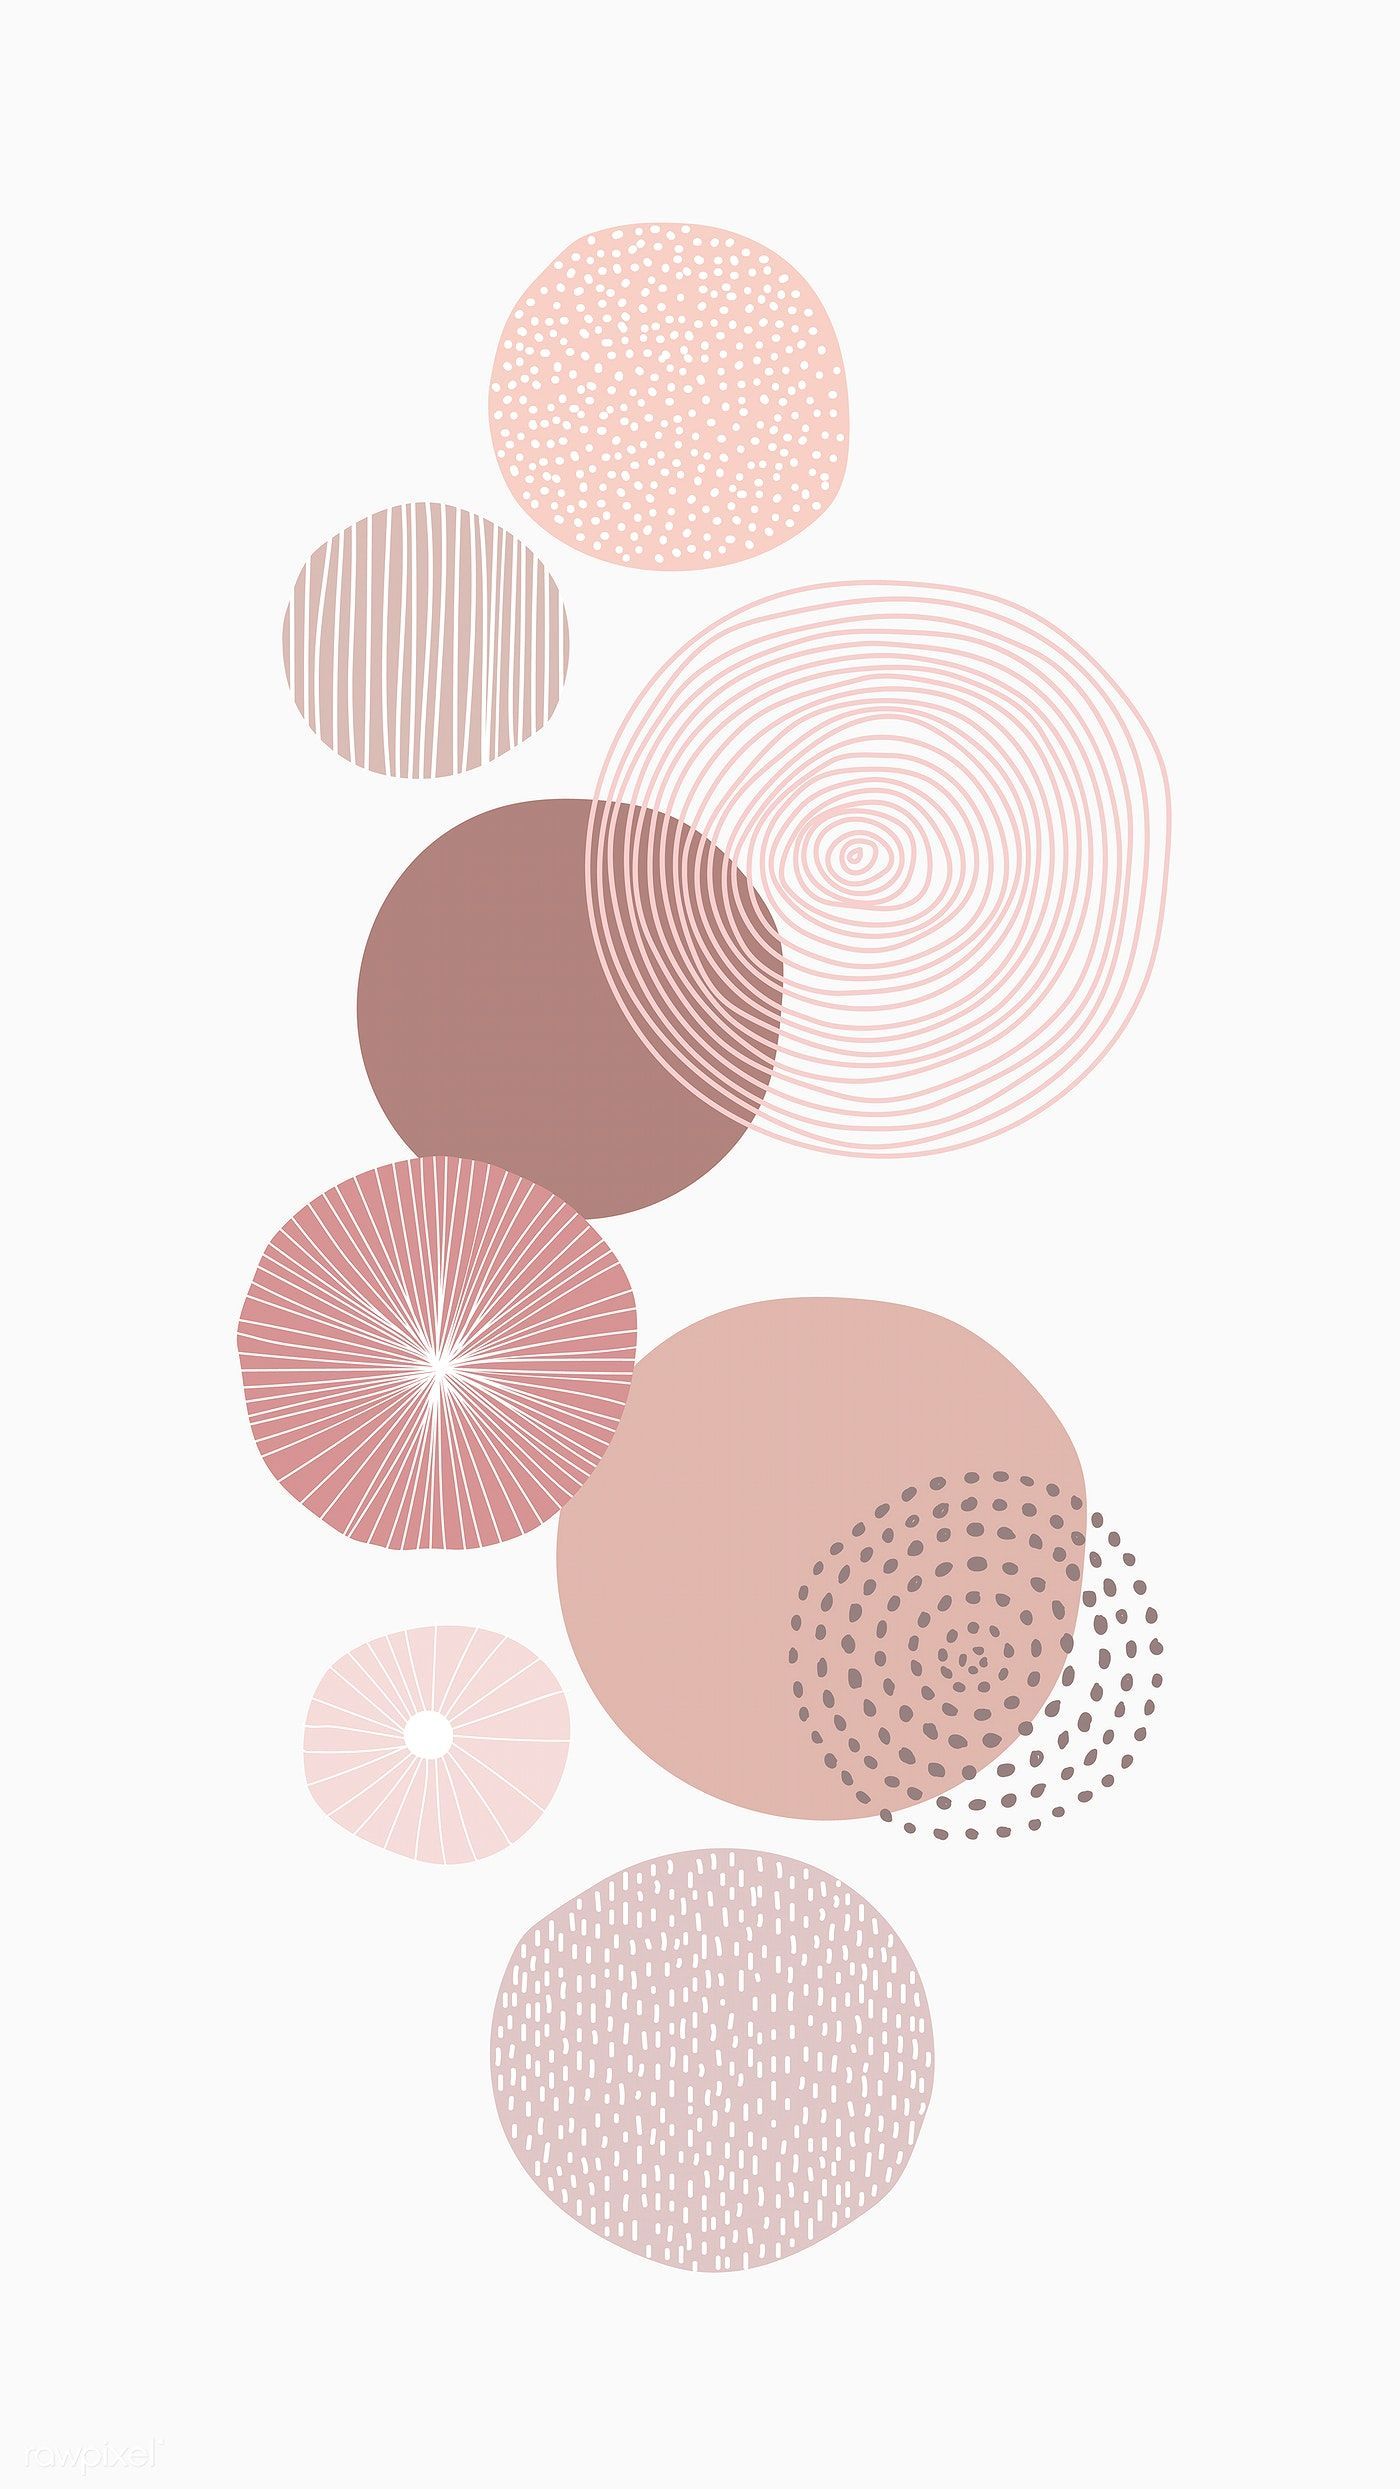 Download premium vector of Pastel pink round patterned background vector. Geometric art prints, Minimalist wallpaper, iPhone background wallpaper